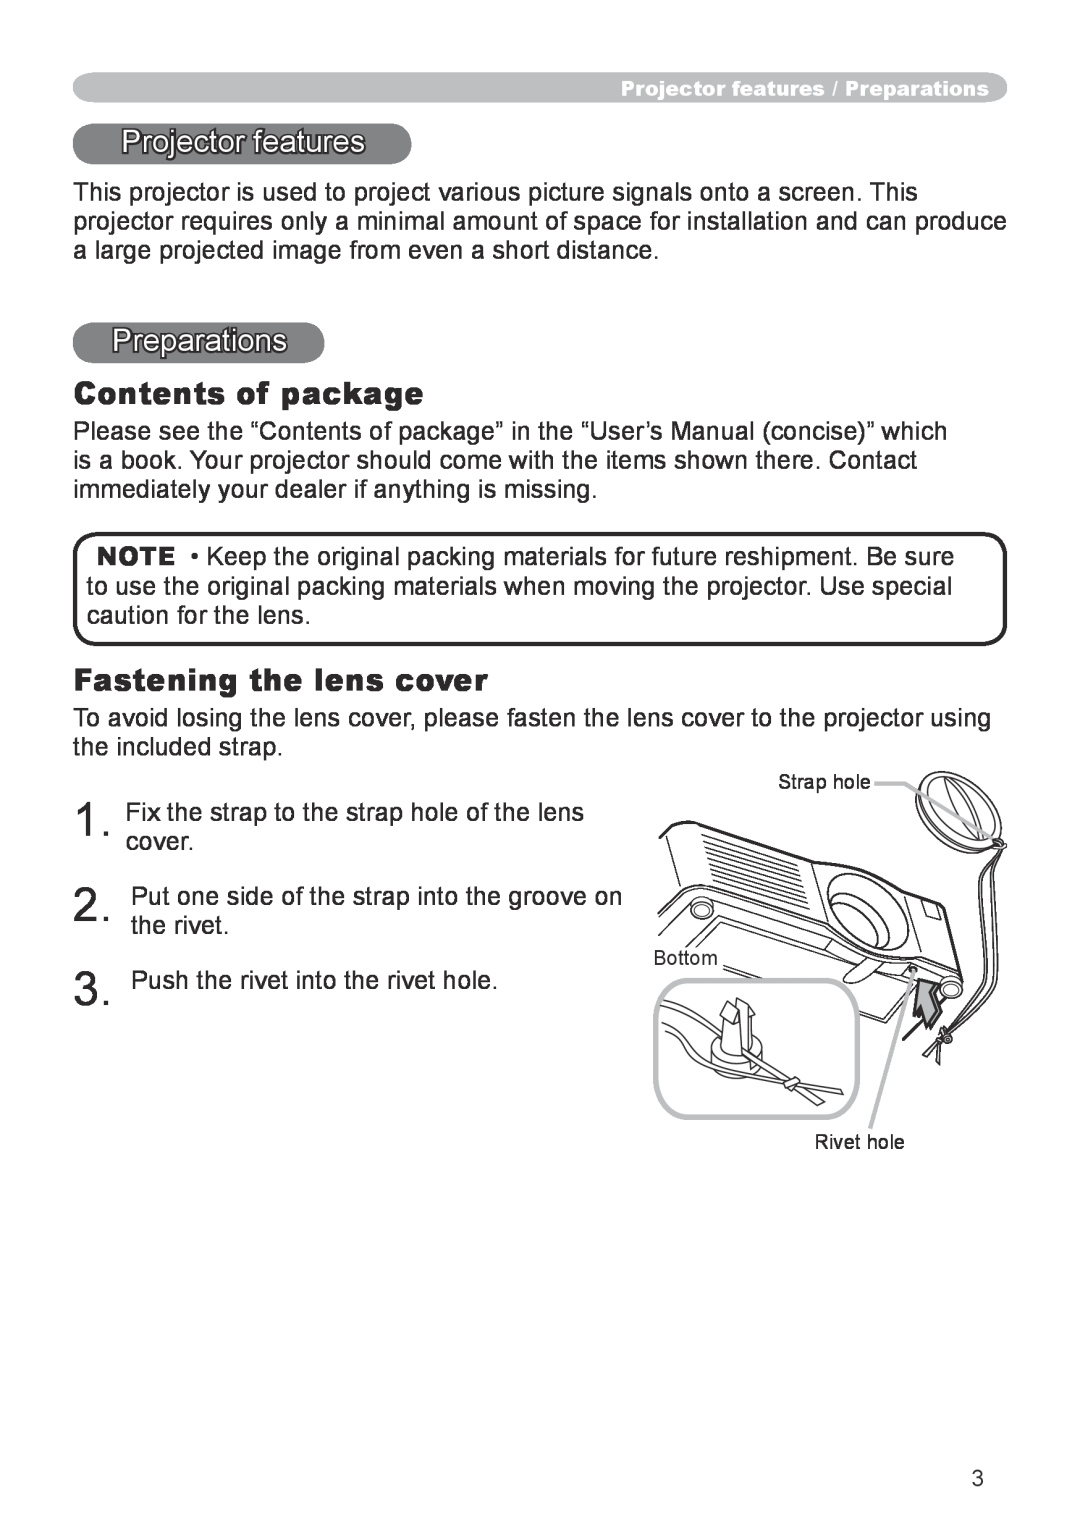 Hitachi CP-X608 user manual Projector features, Preparations, Contents of package, Fastening the lens cover 